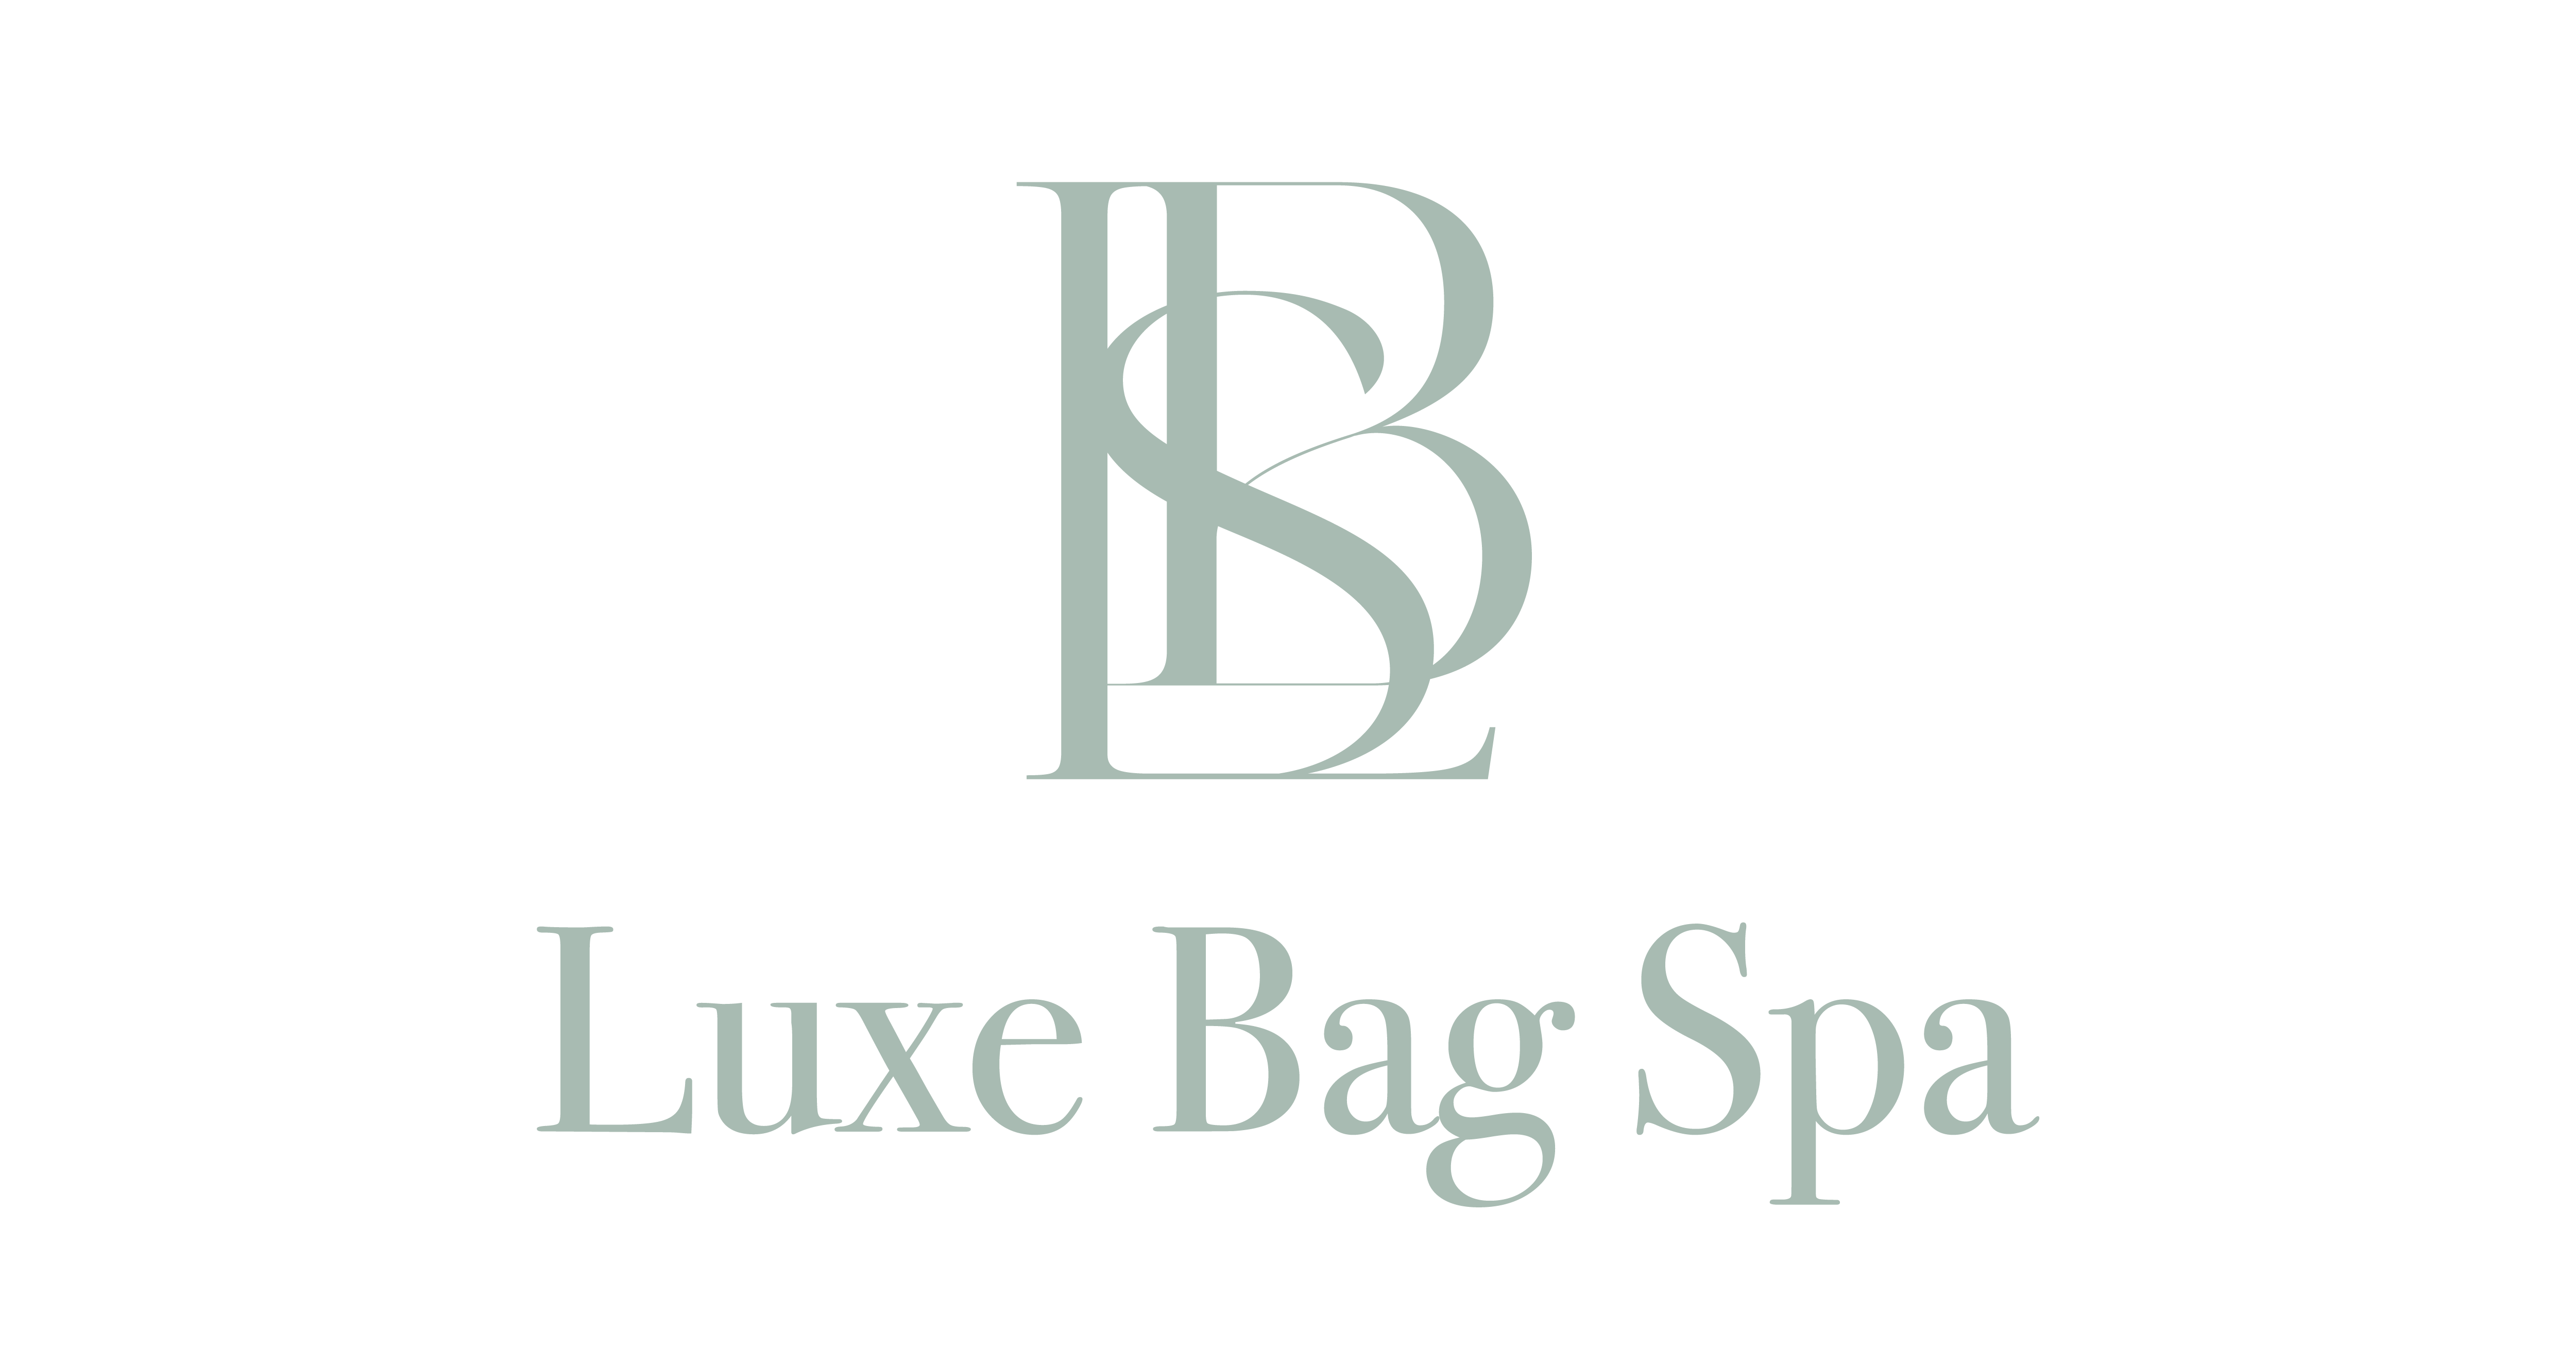 A day in the life of Julie - Luxe Bag Spa 